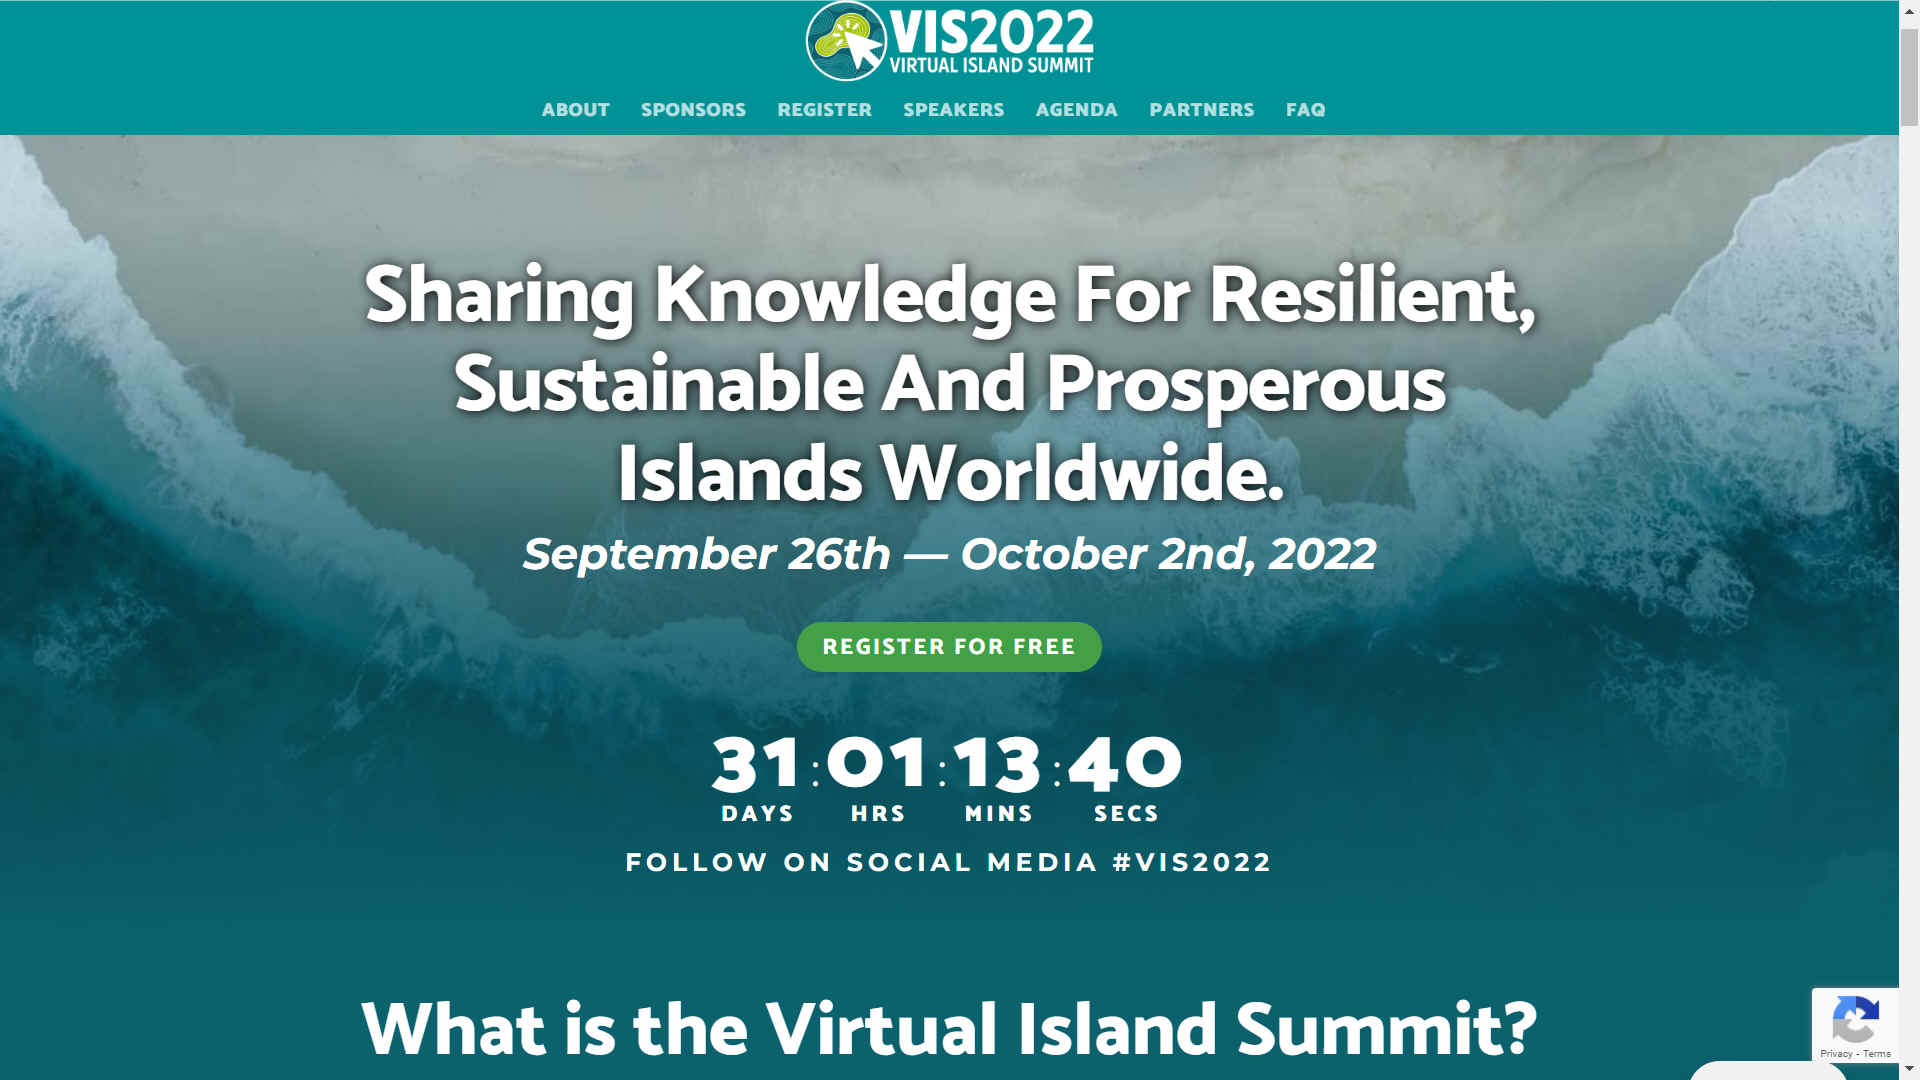 VIS 2022 Virtual Island Summit a free event to discuss climate and sutainability development goals